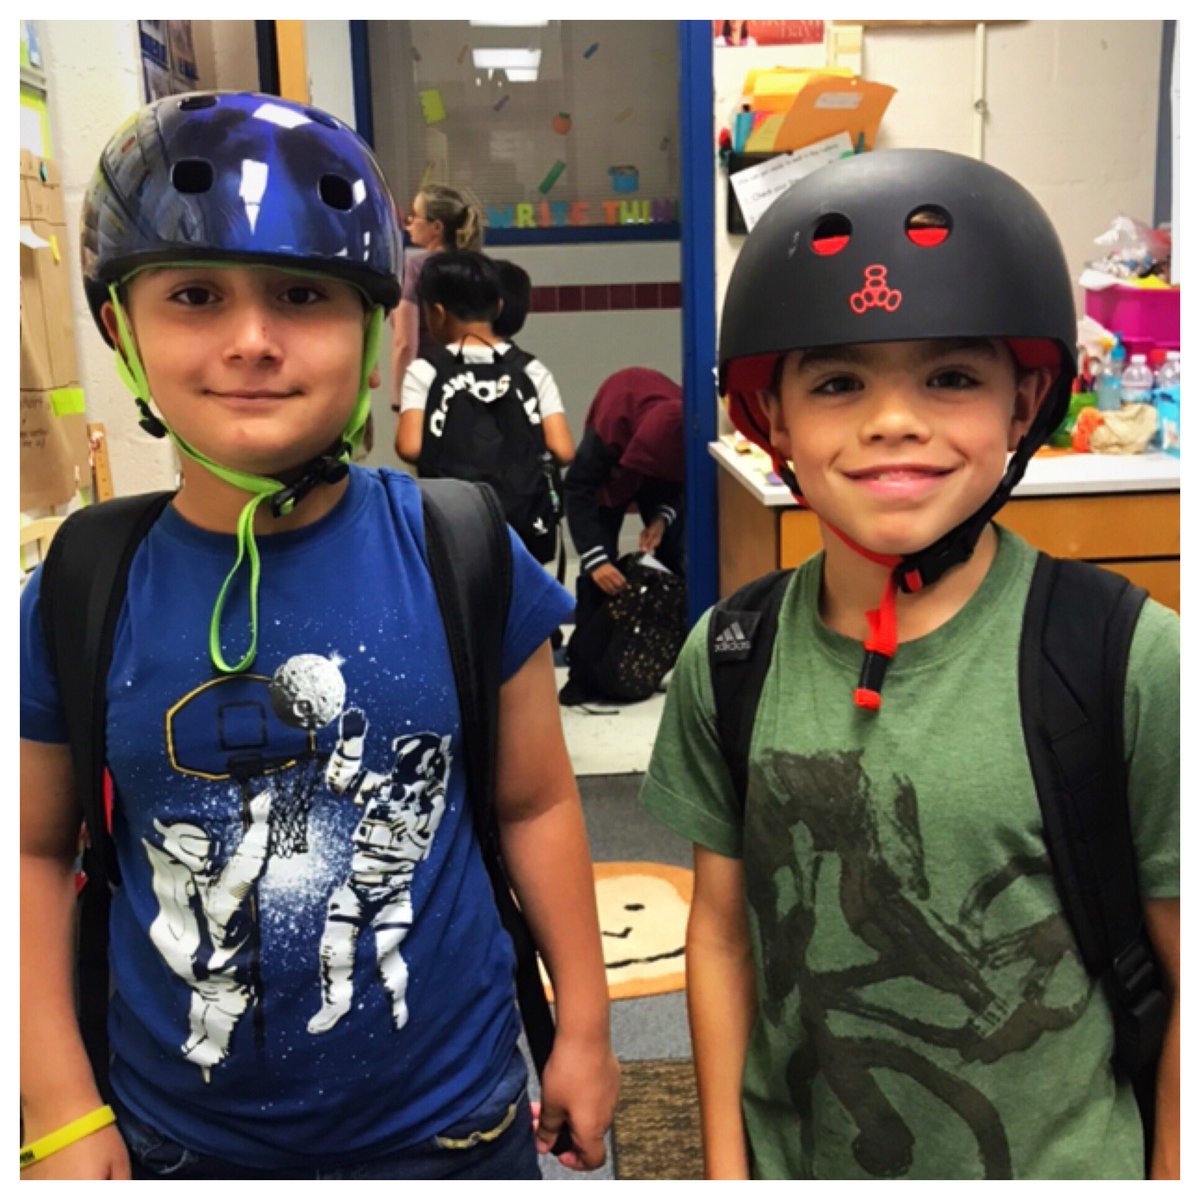 It’s shaping up to be a banner year for #BikeRolltoSchoolDay! More than 1,700 communities in 43 states have registered their May 8 events – join them by registering your event today: walkbiketoschool.org/registration/